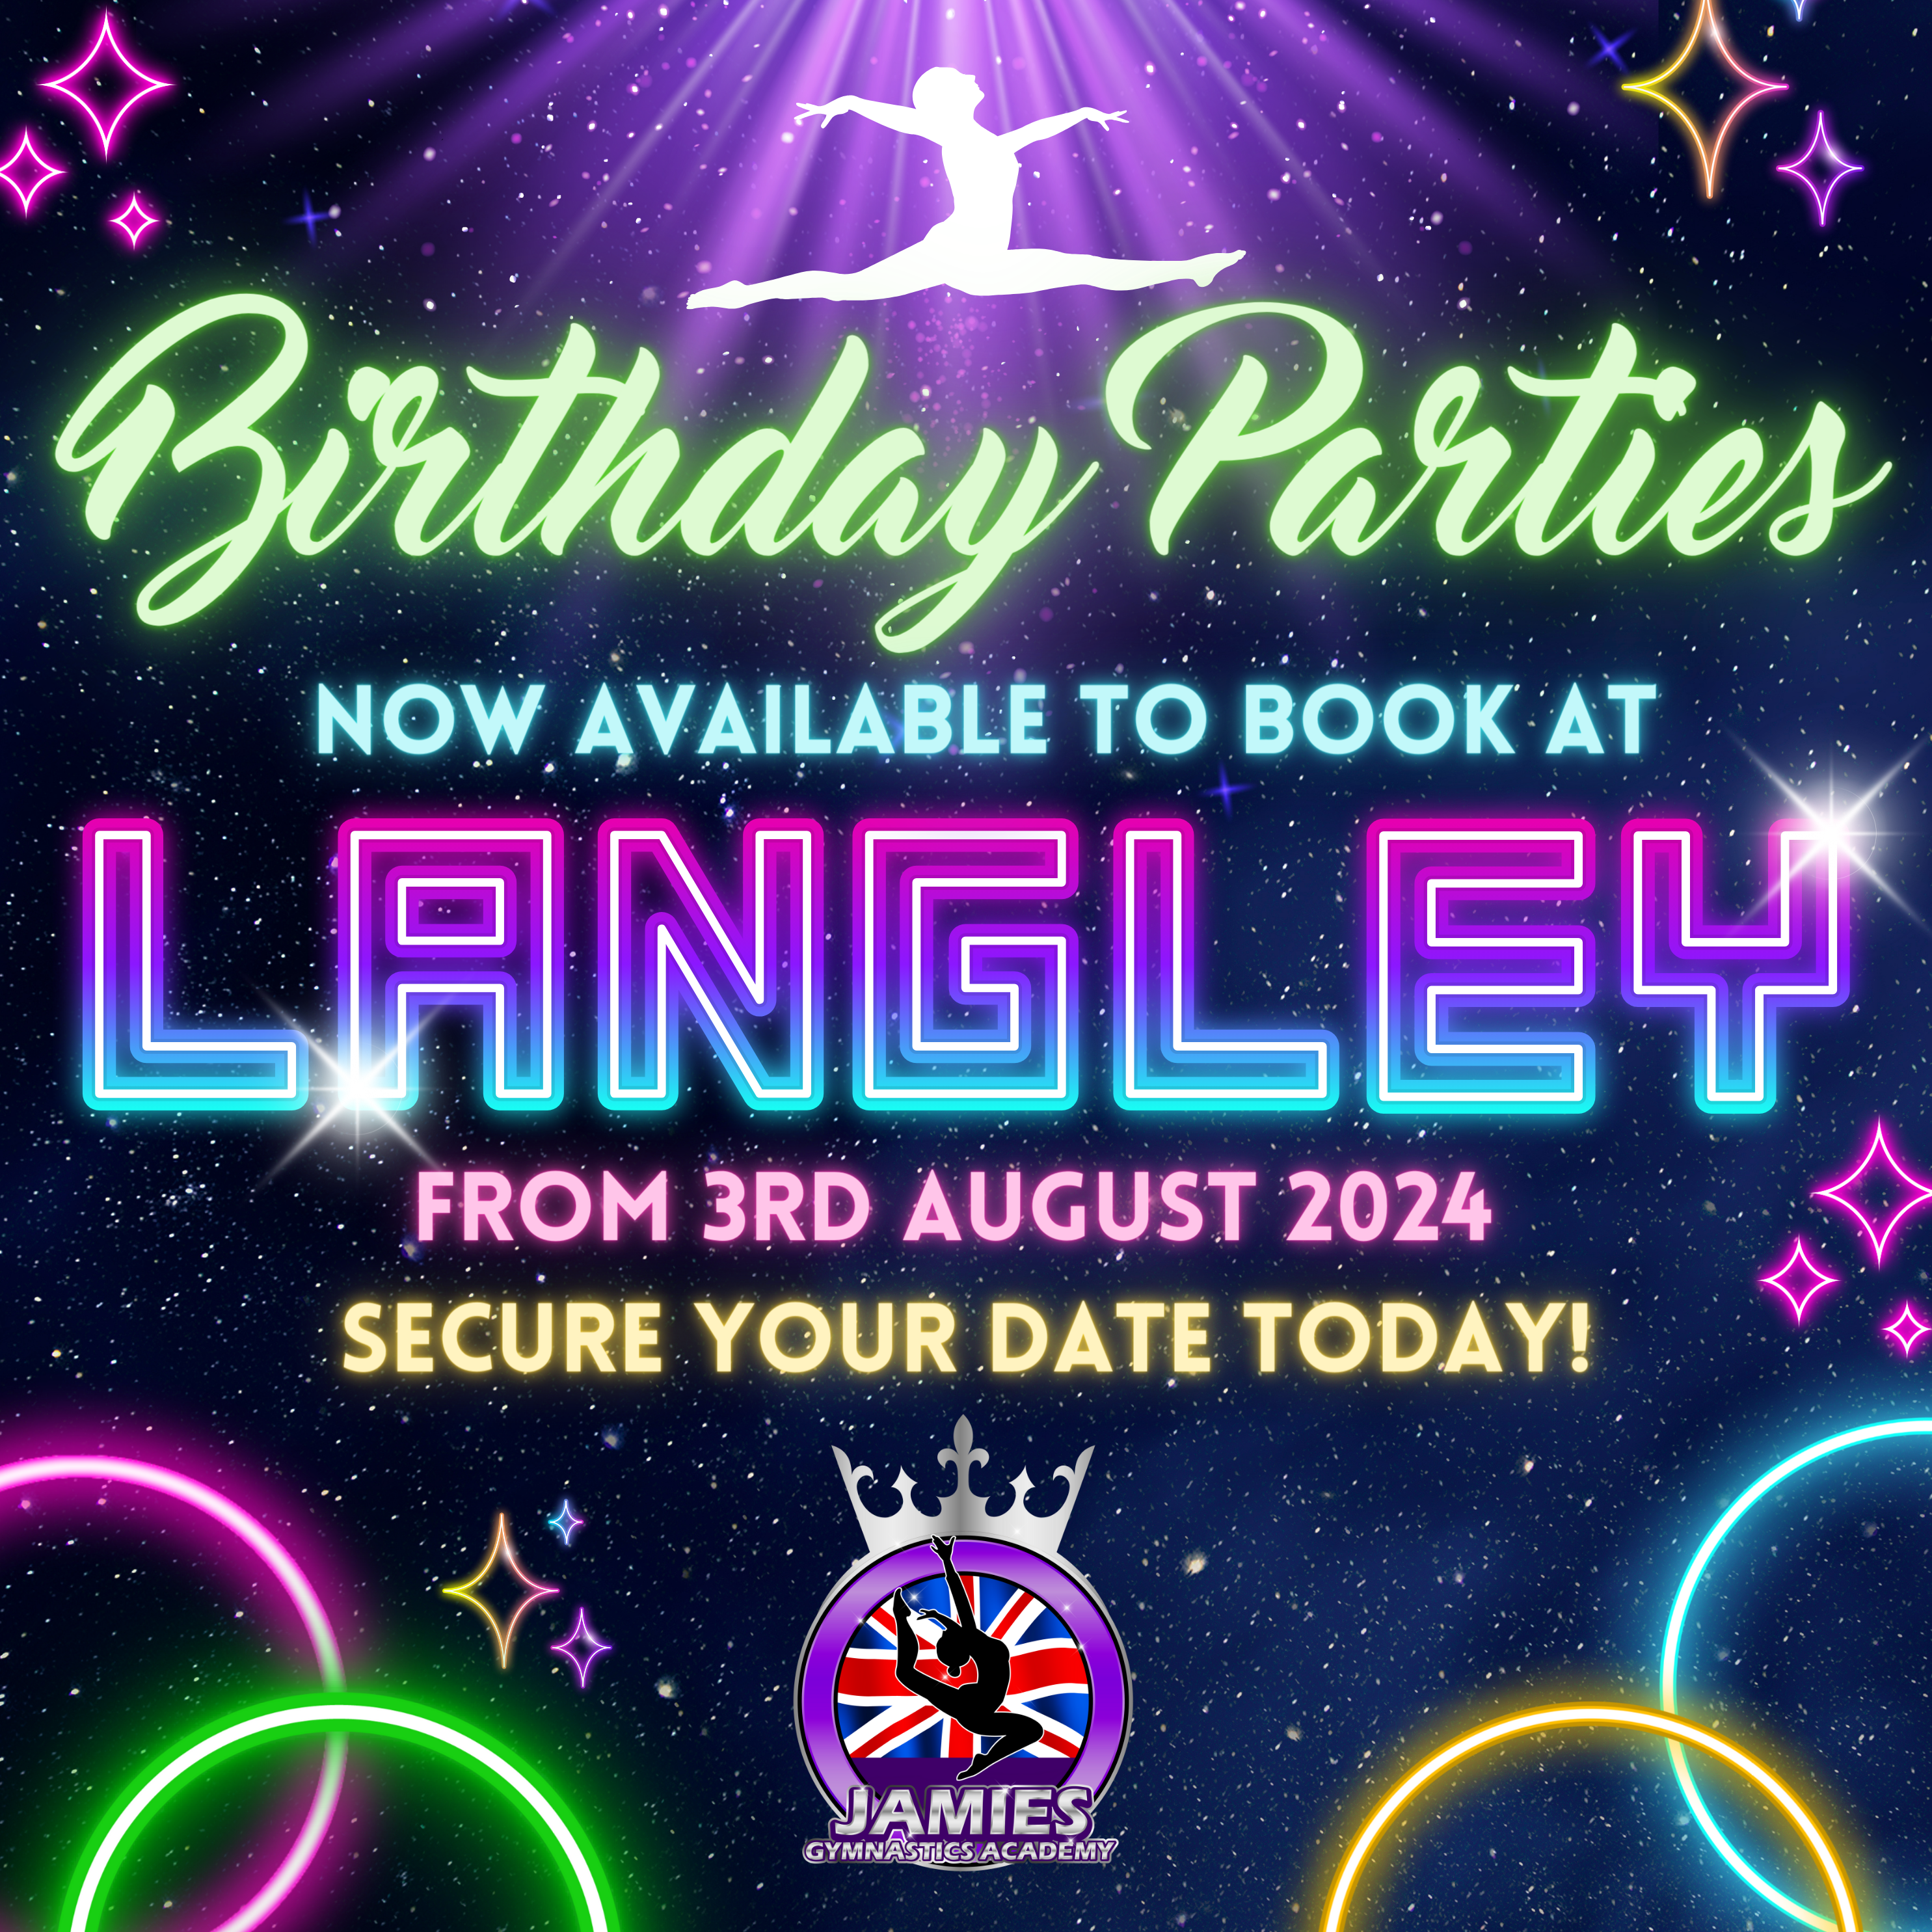 Birthday Parties now at Langley!!